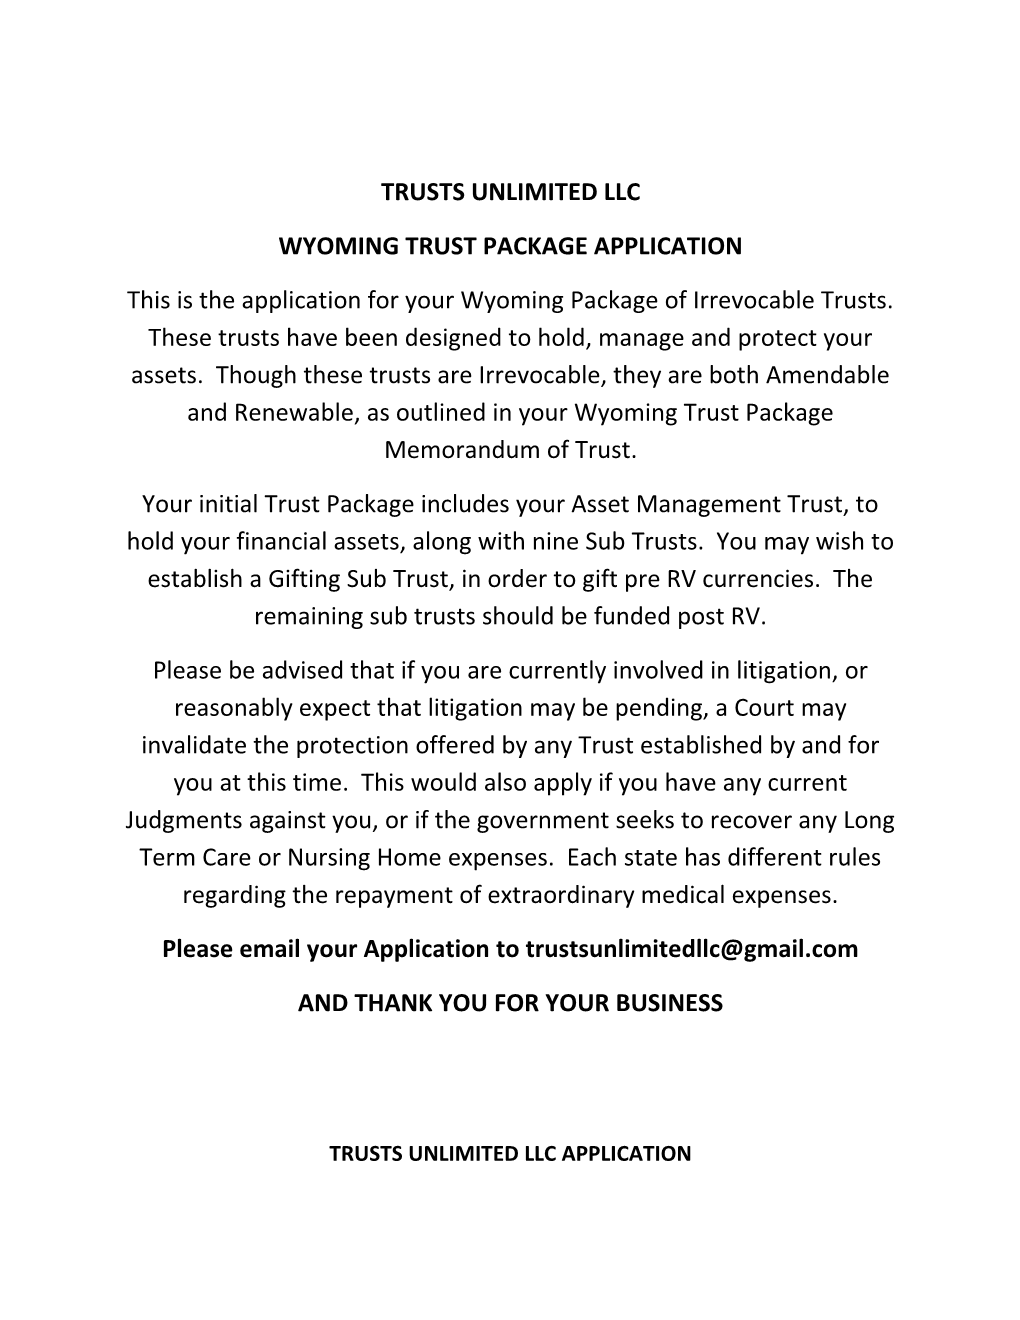 Wyoming Trust Package Application